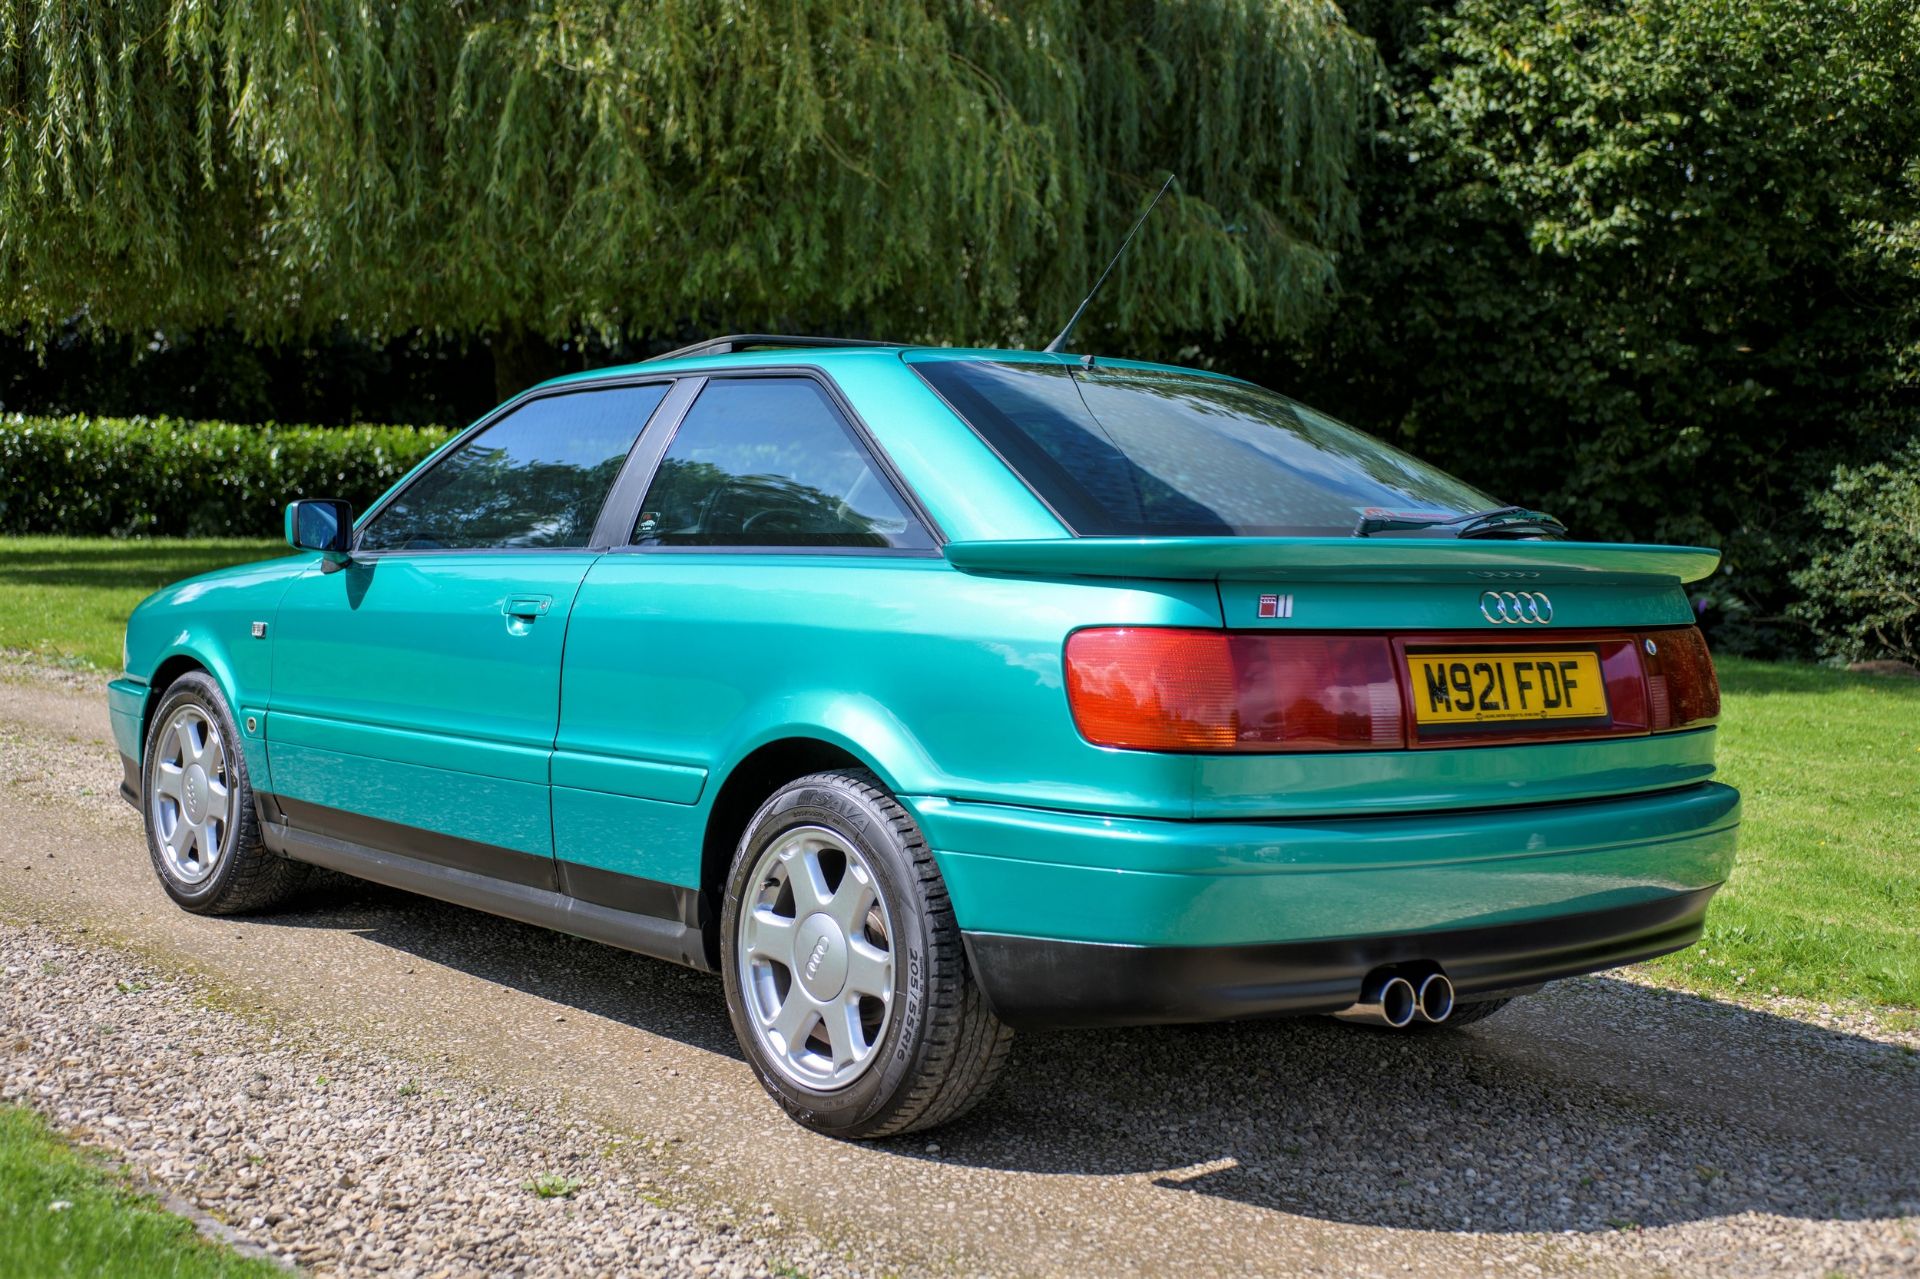 1995 AUDI S2 COUPE Registration Number: M921 FDF Chassis Number: WAUZZZ8132SA000286 - Finished in - Image 8 of 27